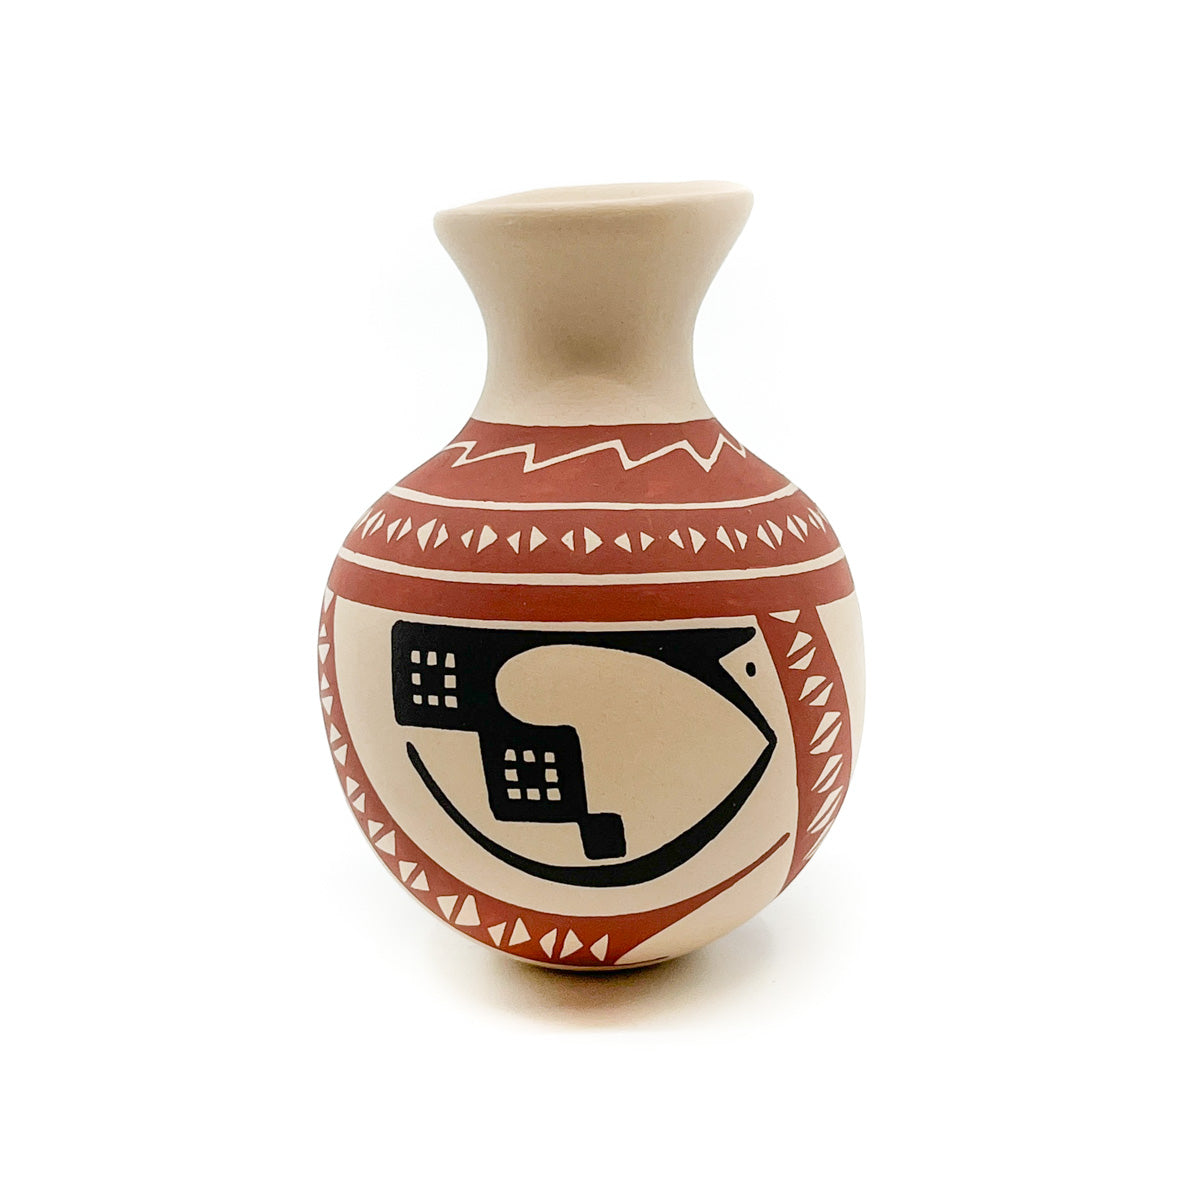 Small Vase with Red & Black Designs on White Clay